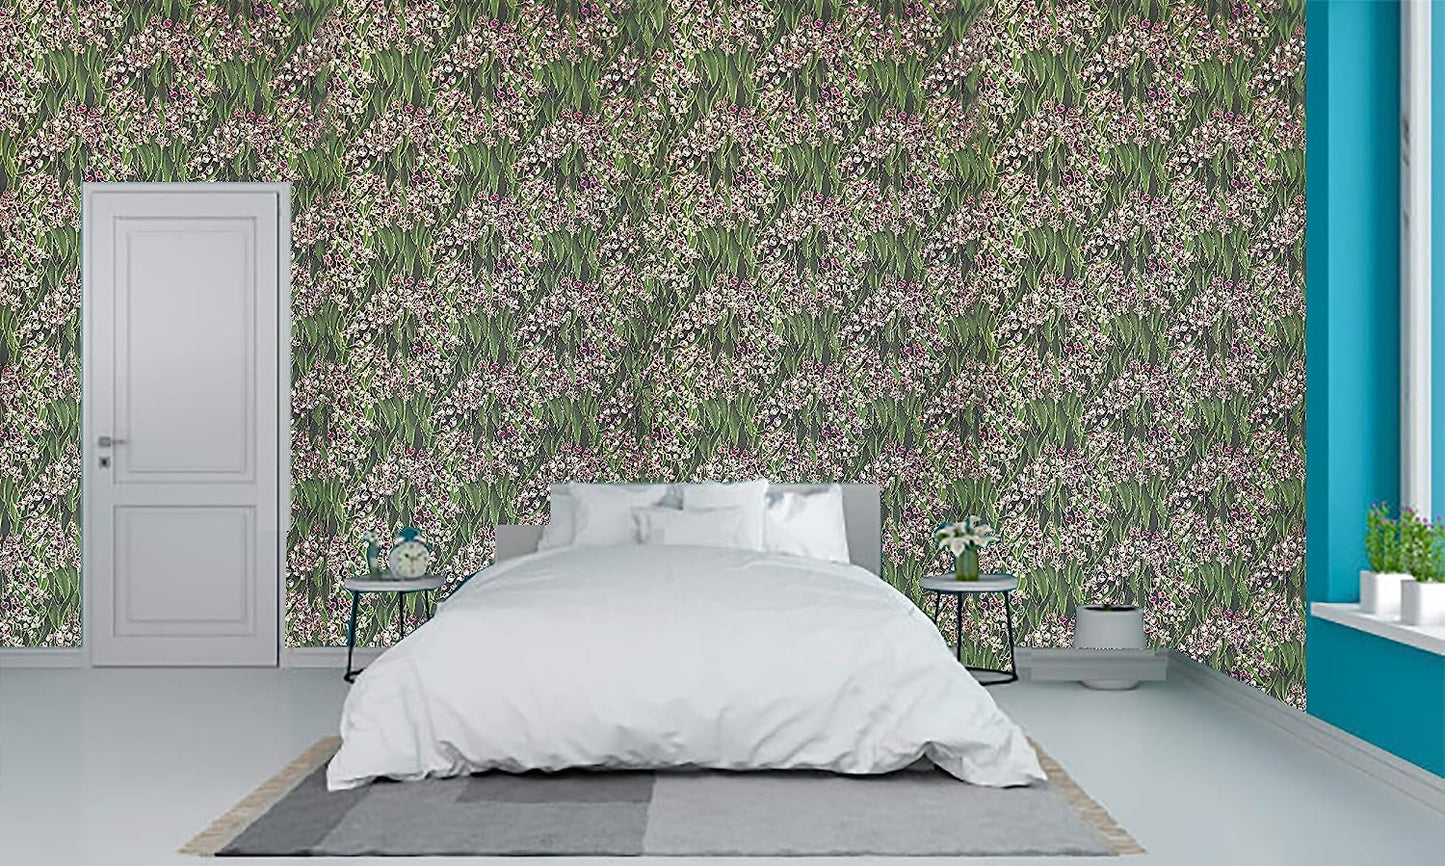 3D Latest Floral Design Green Wallpaper Roll for Home Walls 57 Sq Ft (0.53m  or 33 Feet)